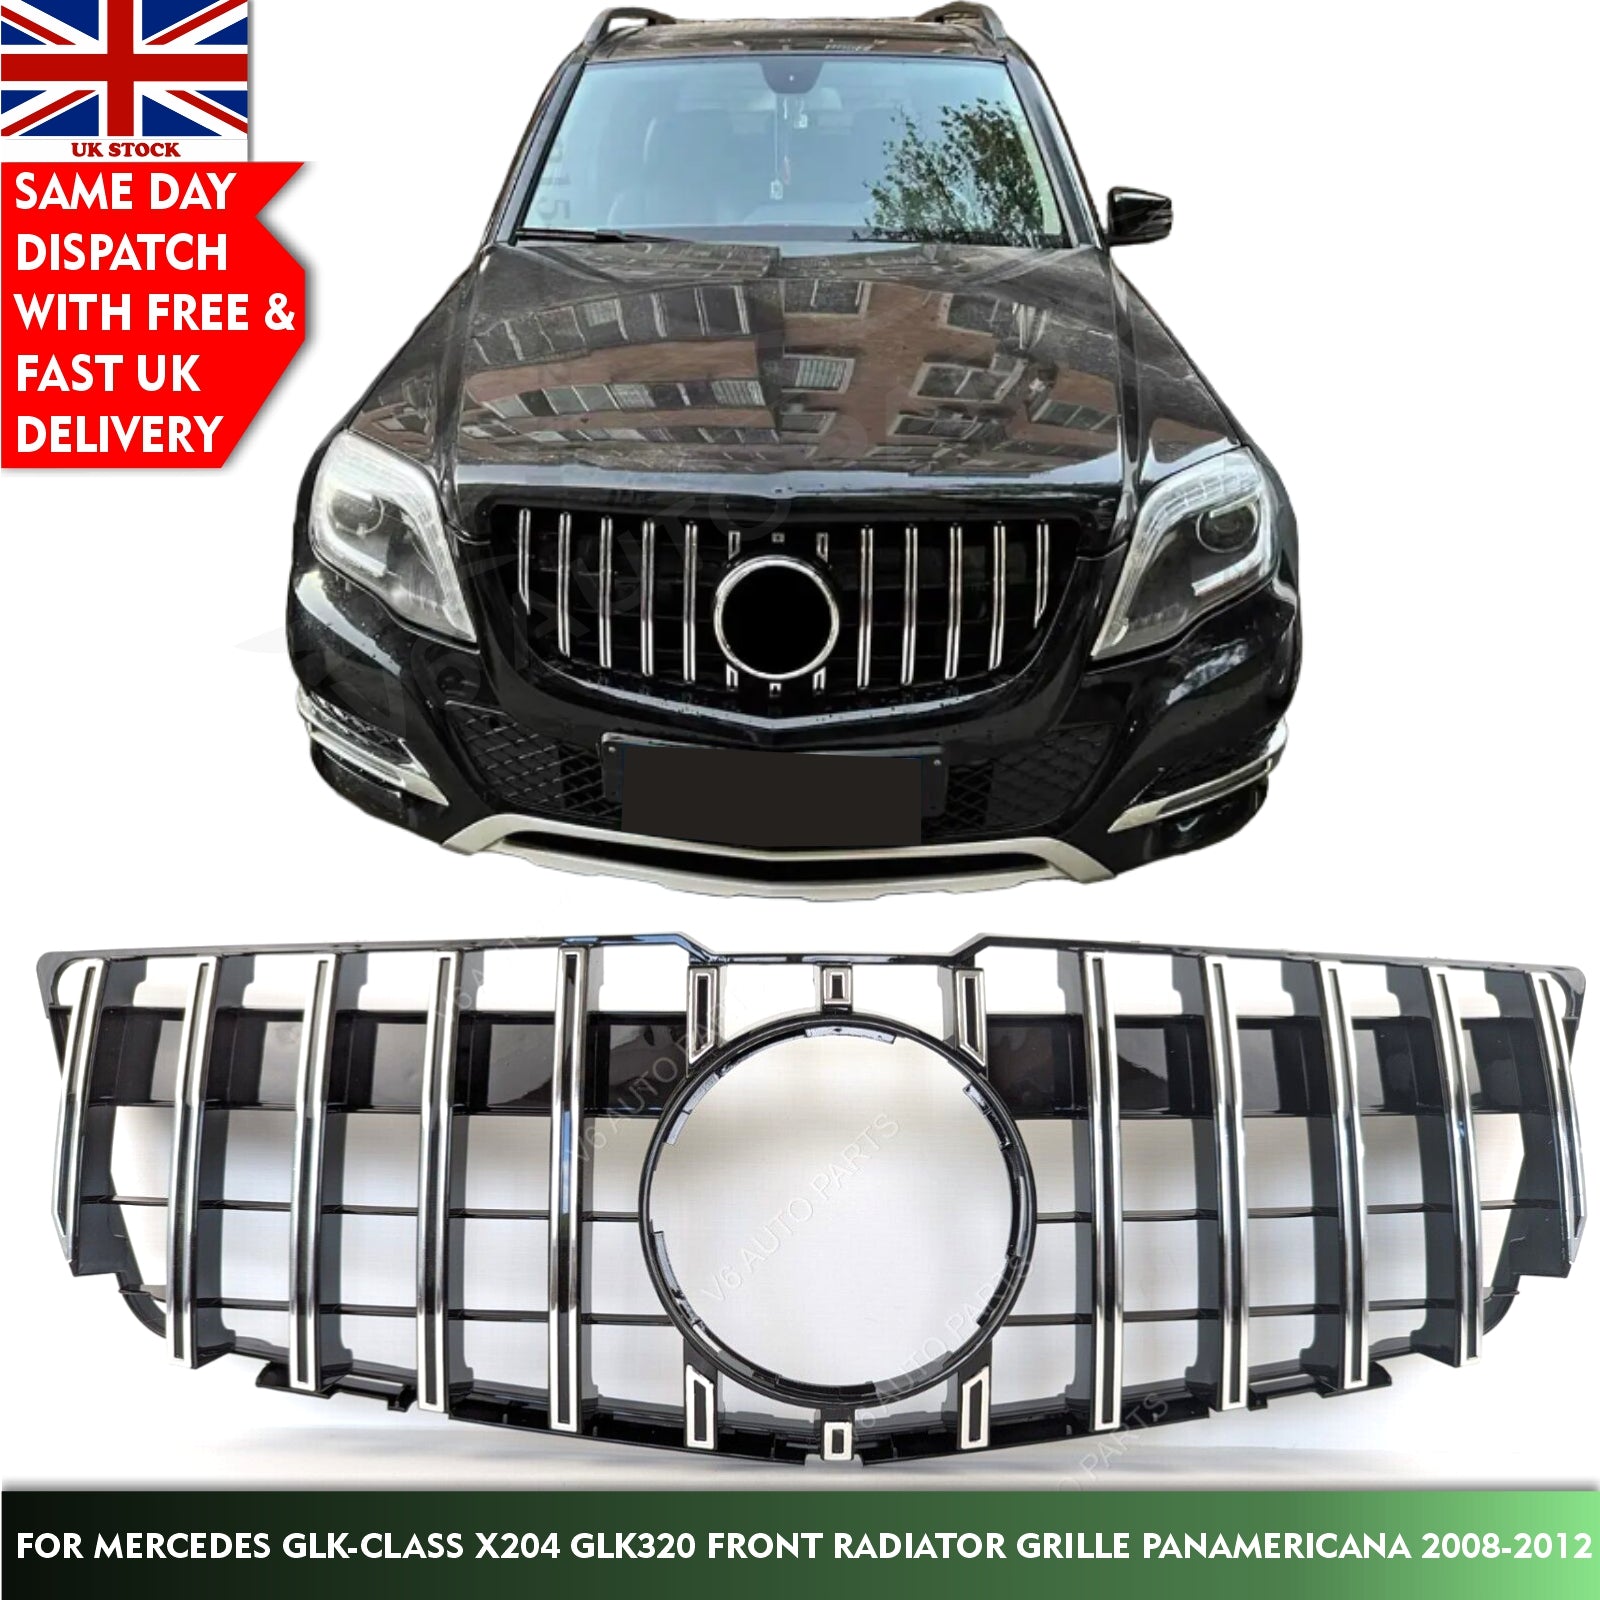 For Mercedes GLK-Class X204 GLK320 Front Radiator Grille Panamericana 2008-2012